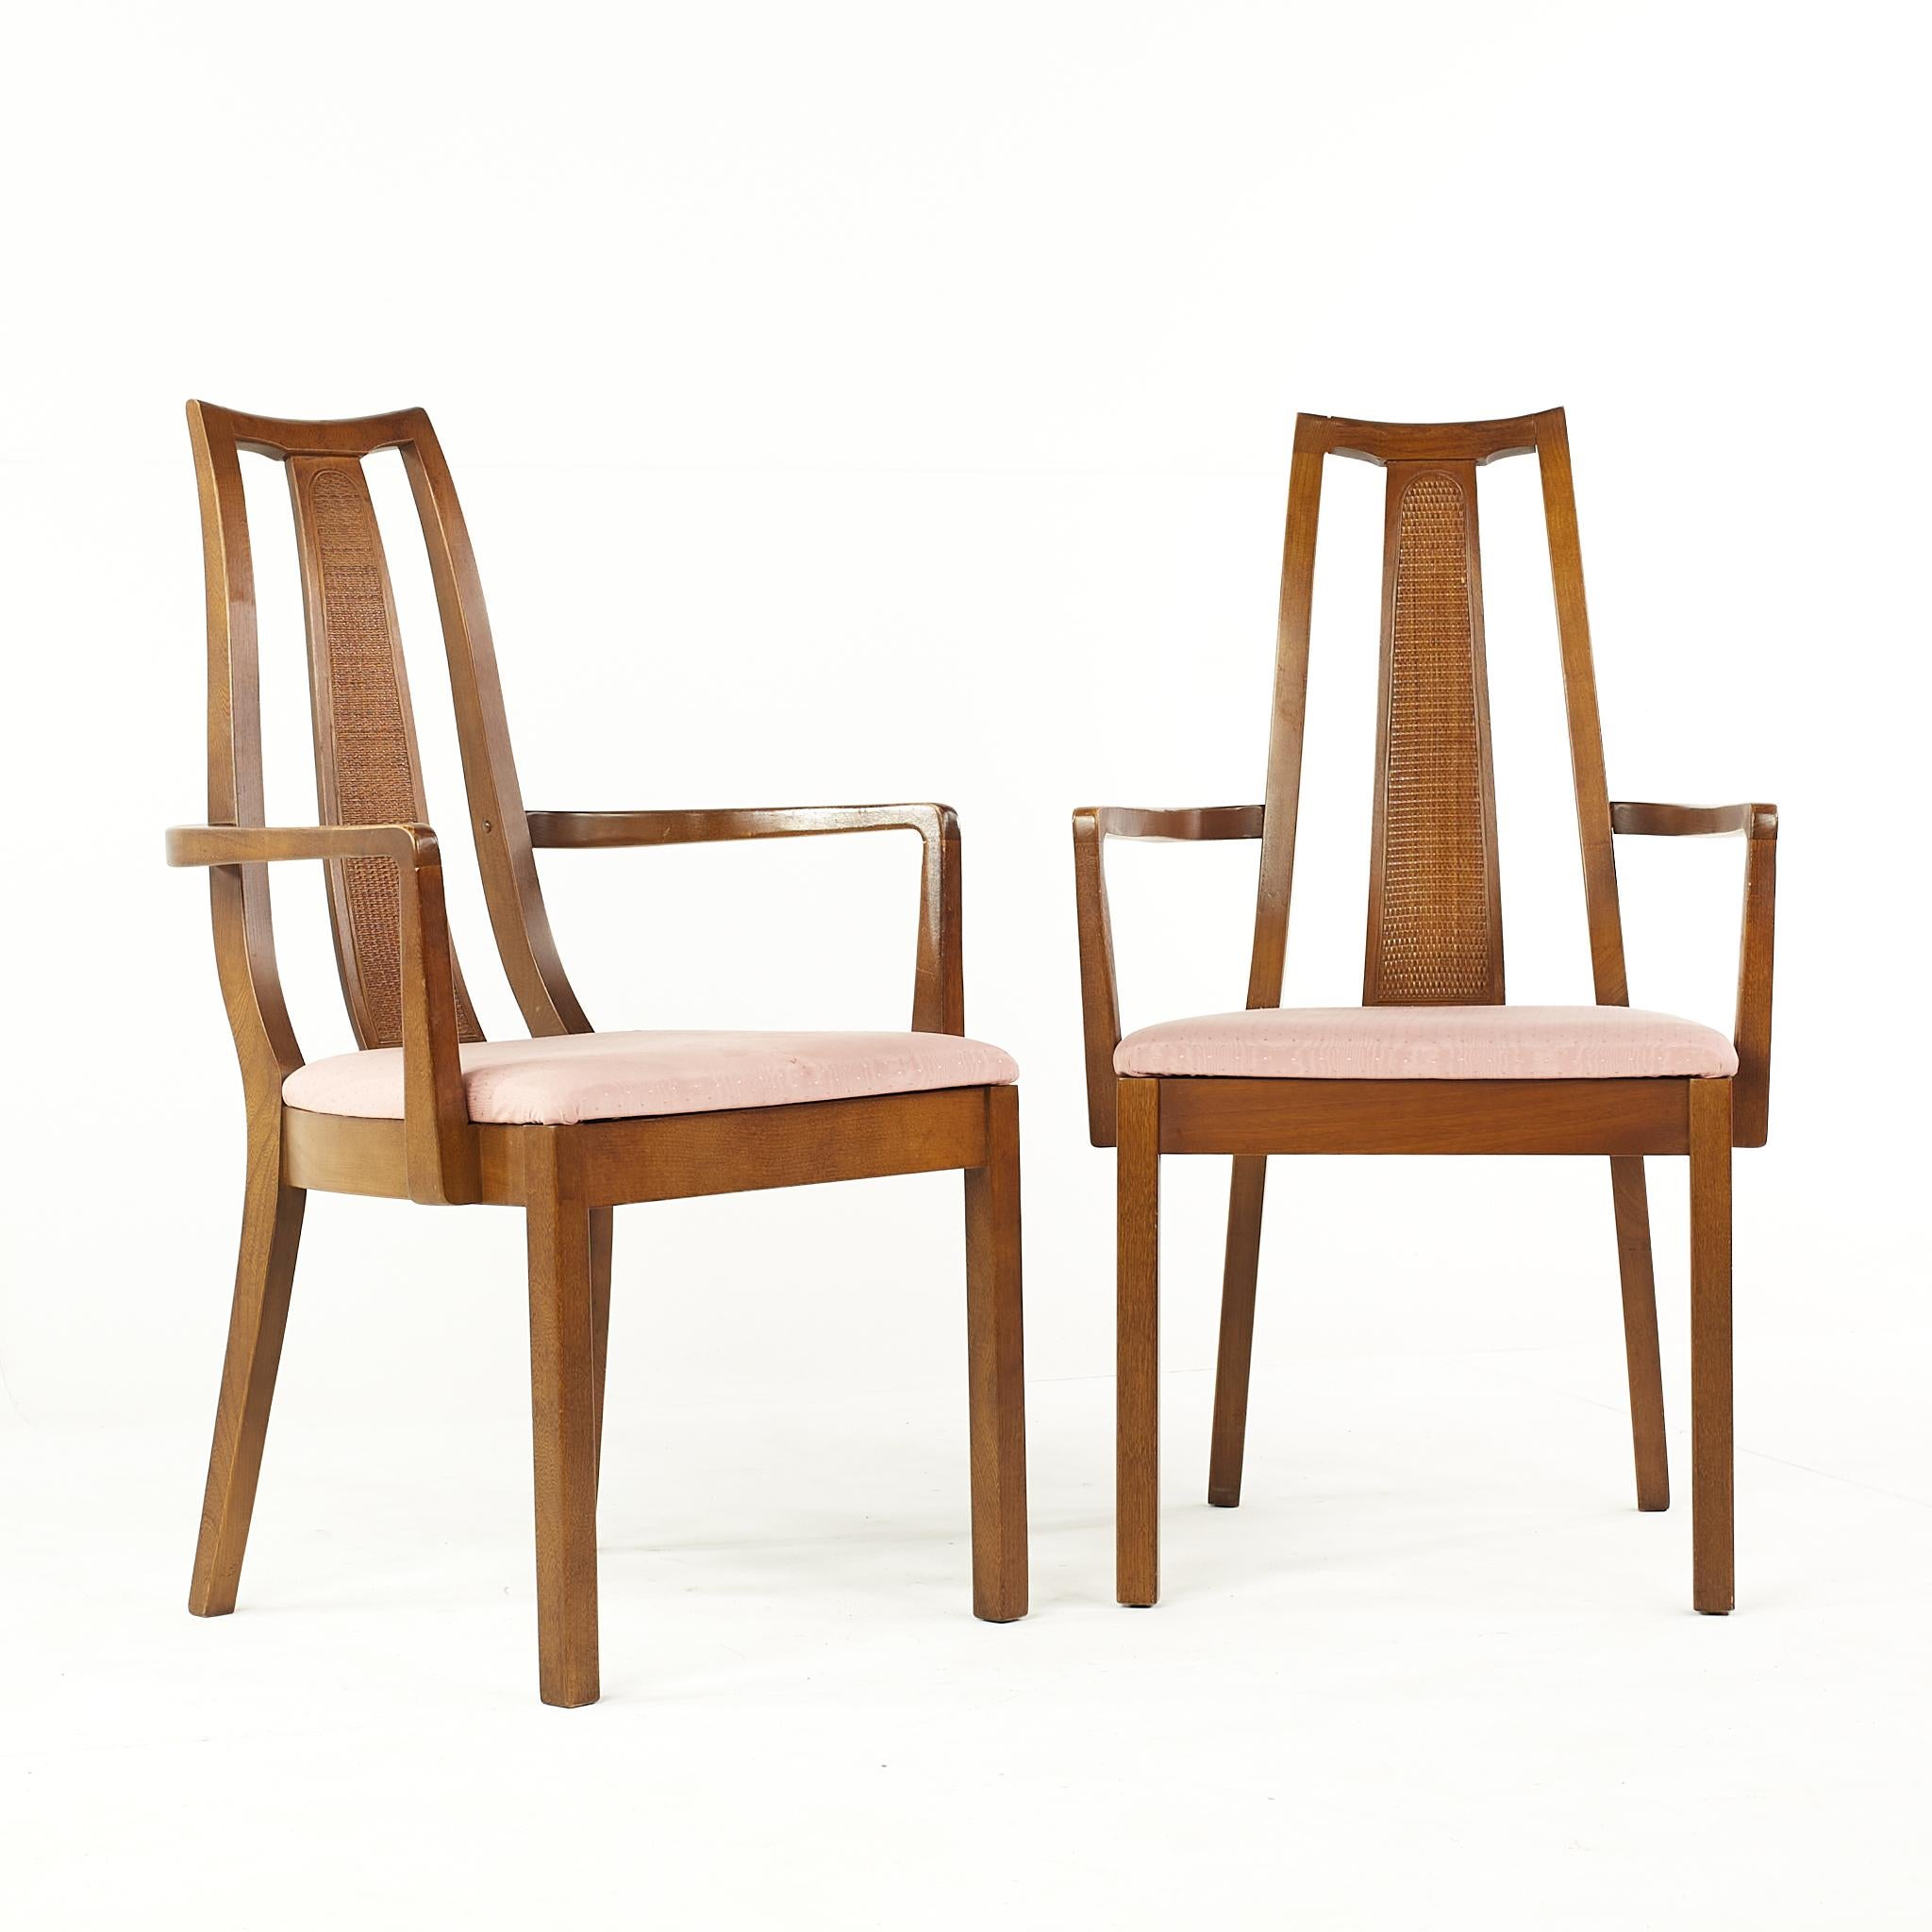 American of Martinsville Mid Century Walnut Captains Chairs - Pair

These chairs measure: 22 wide x 22 deep x 38 inches high, with a seat height of 18 and arm height/chair clearance of 25 inches

All pieces of furniture can be had in what we